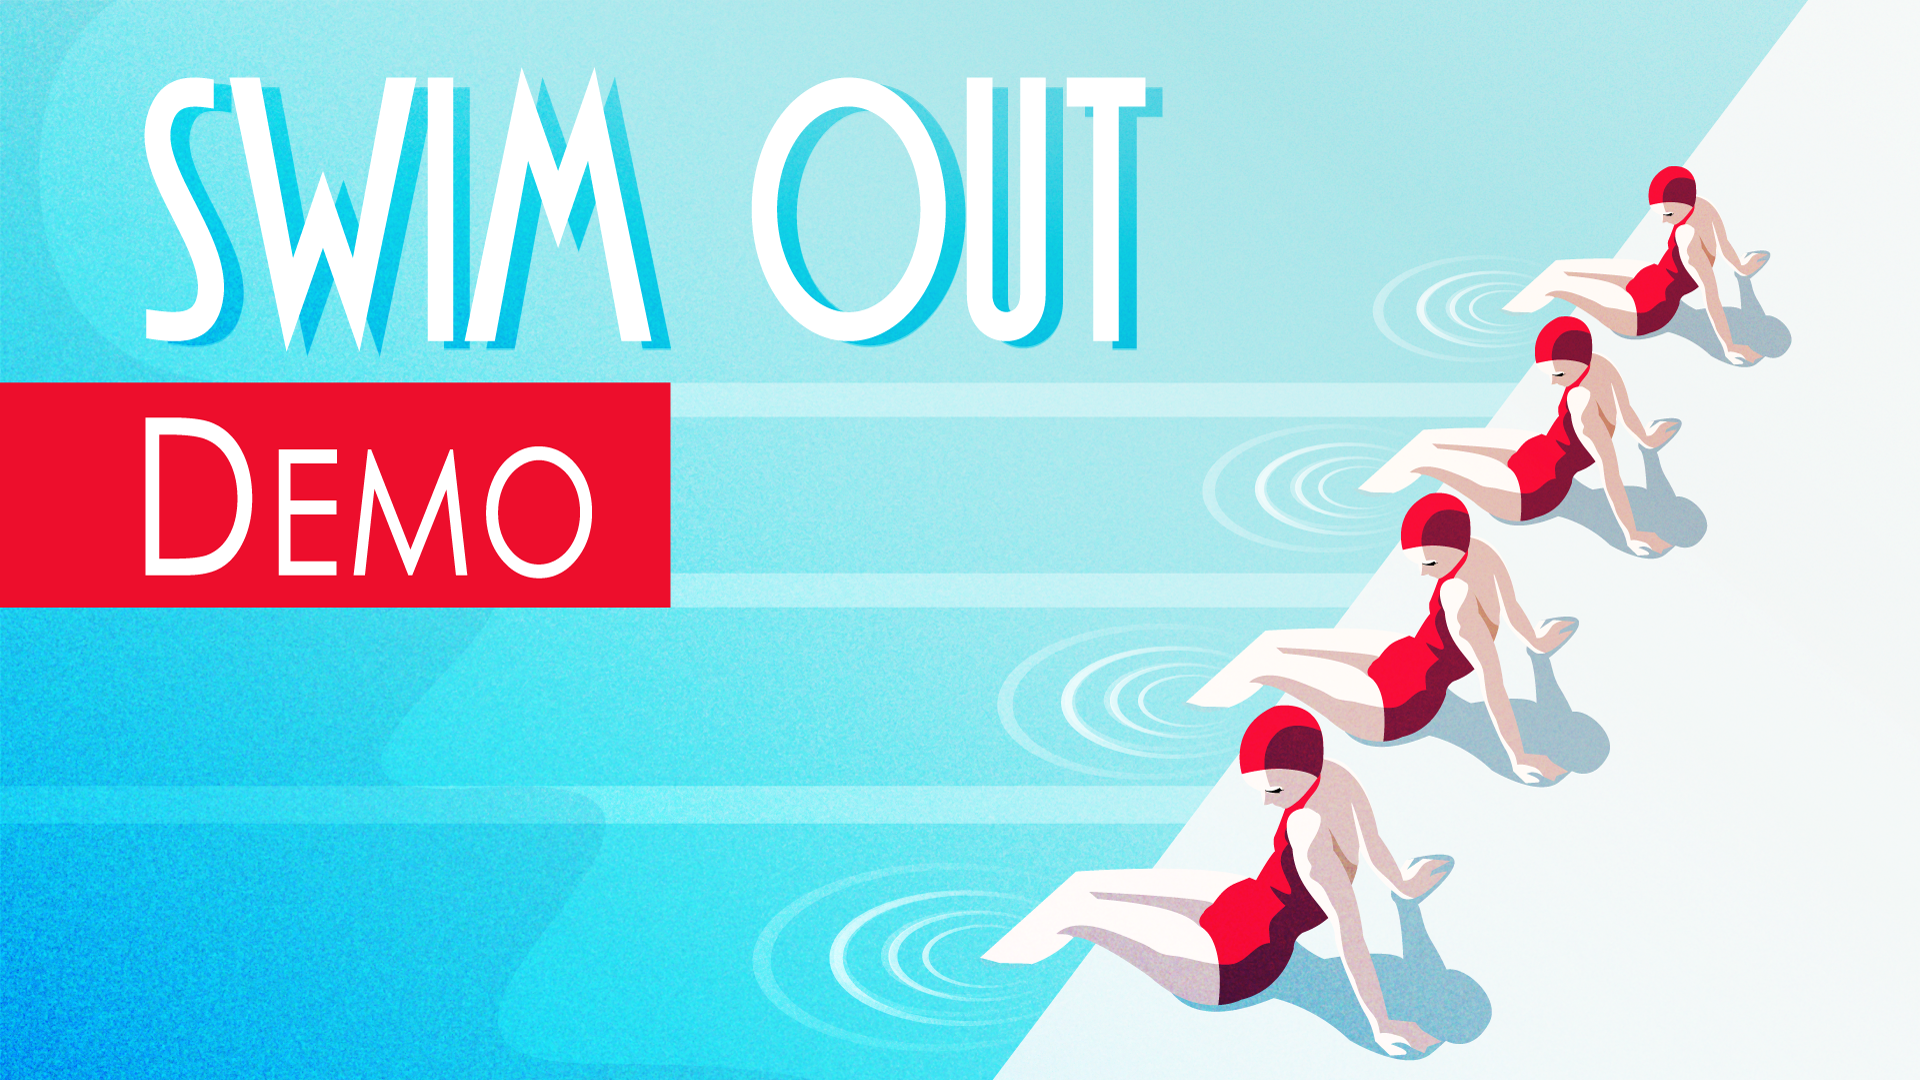 Out demo. Swim out.